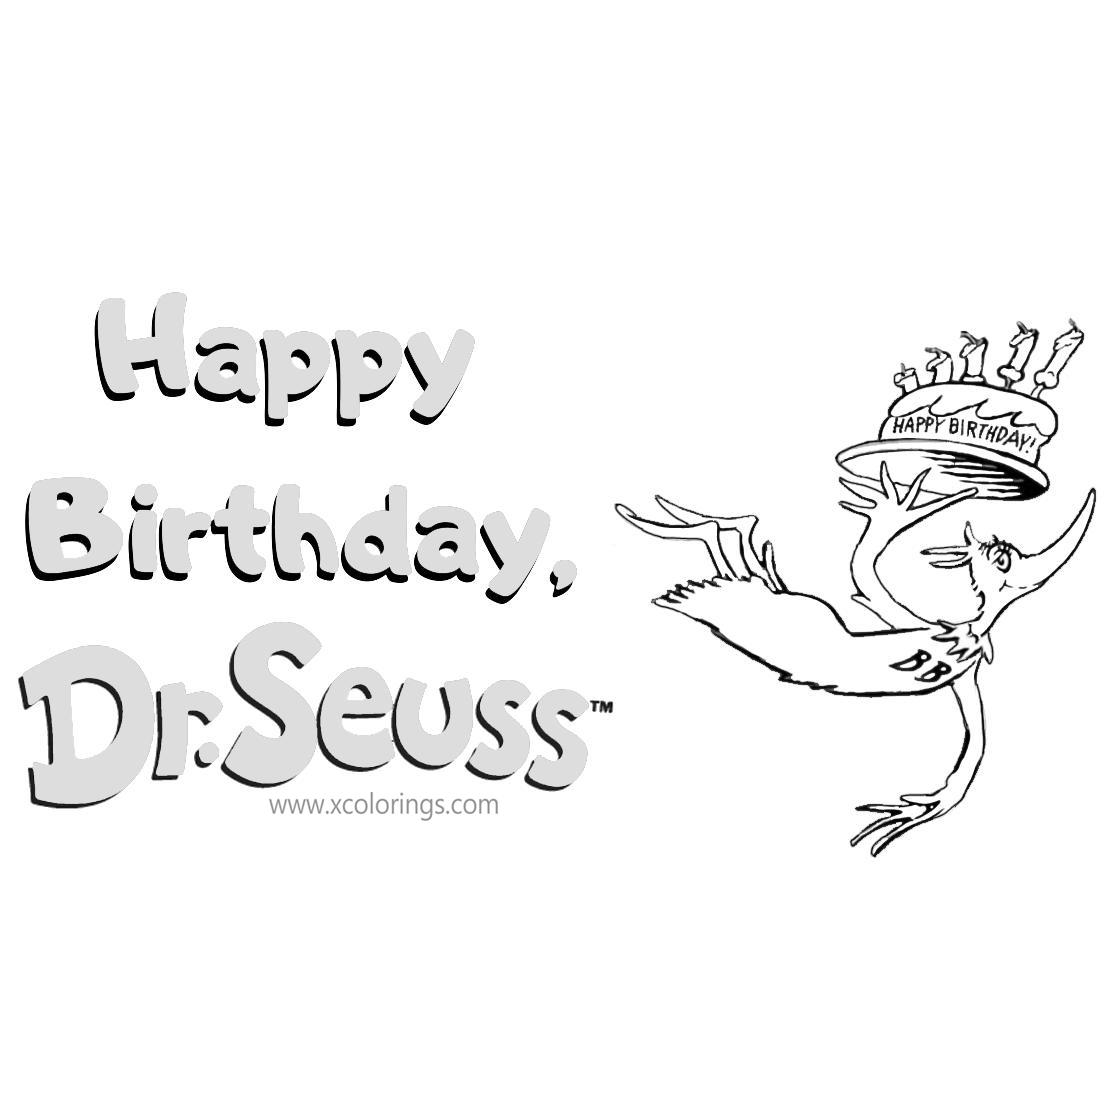 Free Happy Birthday Dr Seuss Coloring Pages Sneetches with Cake printable